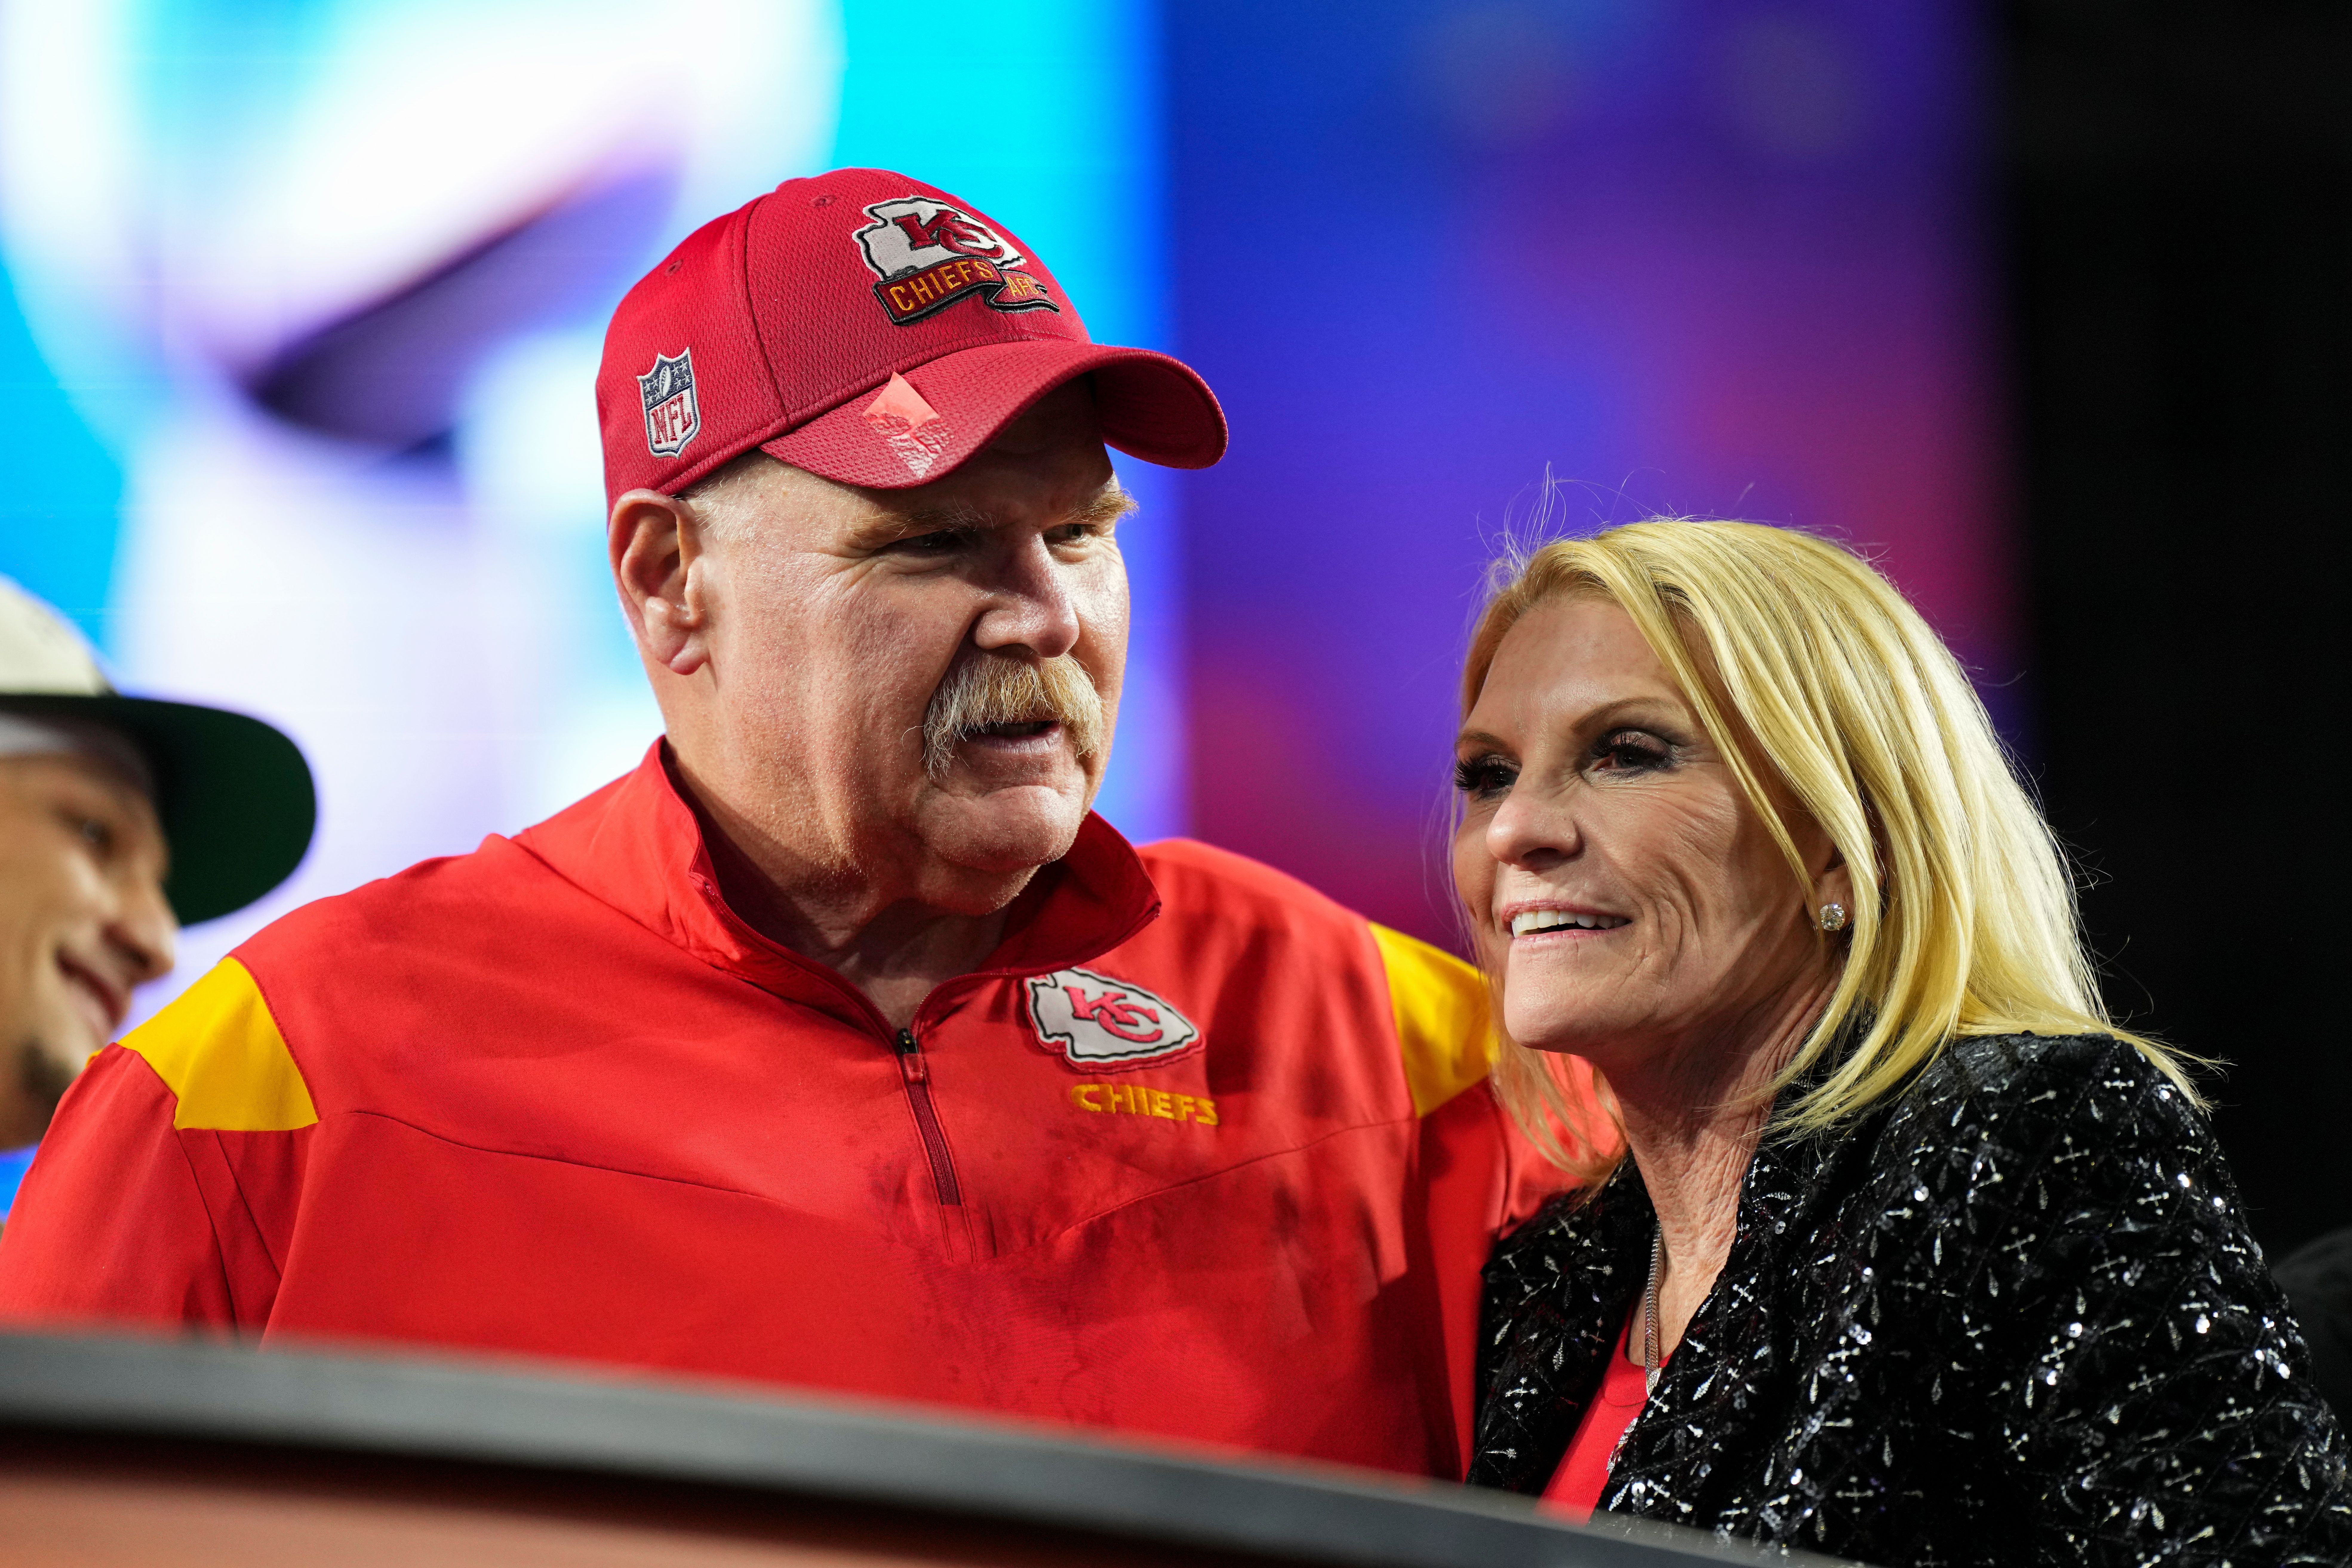 Andy Reid and Tammy Reid during the Super Bowl LVII against the Philadelphia Eagles at State Farm Stadium on February 12, 2023, in Glendale, Arizona. | Source: Getty Images